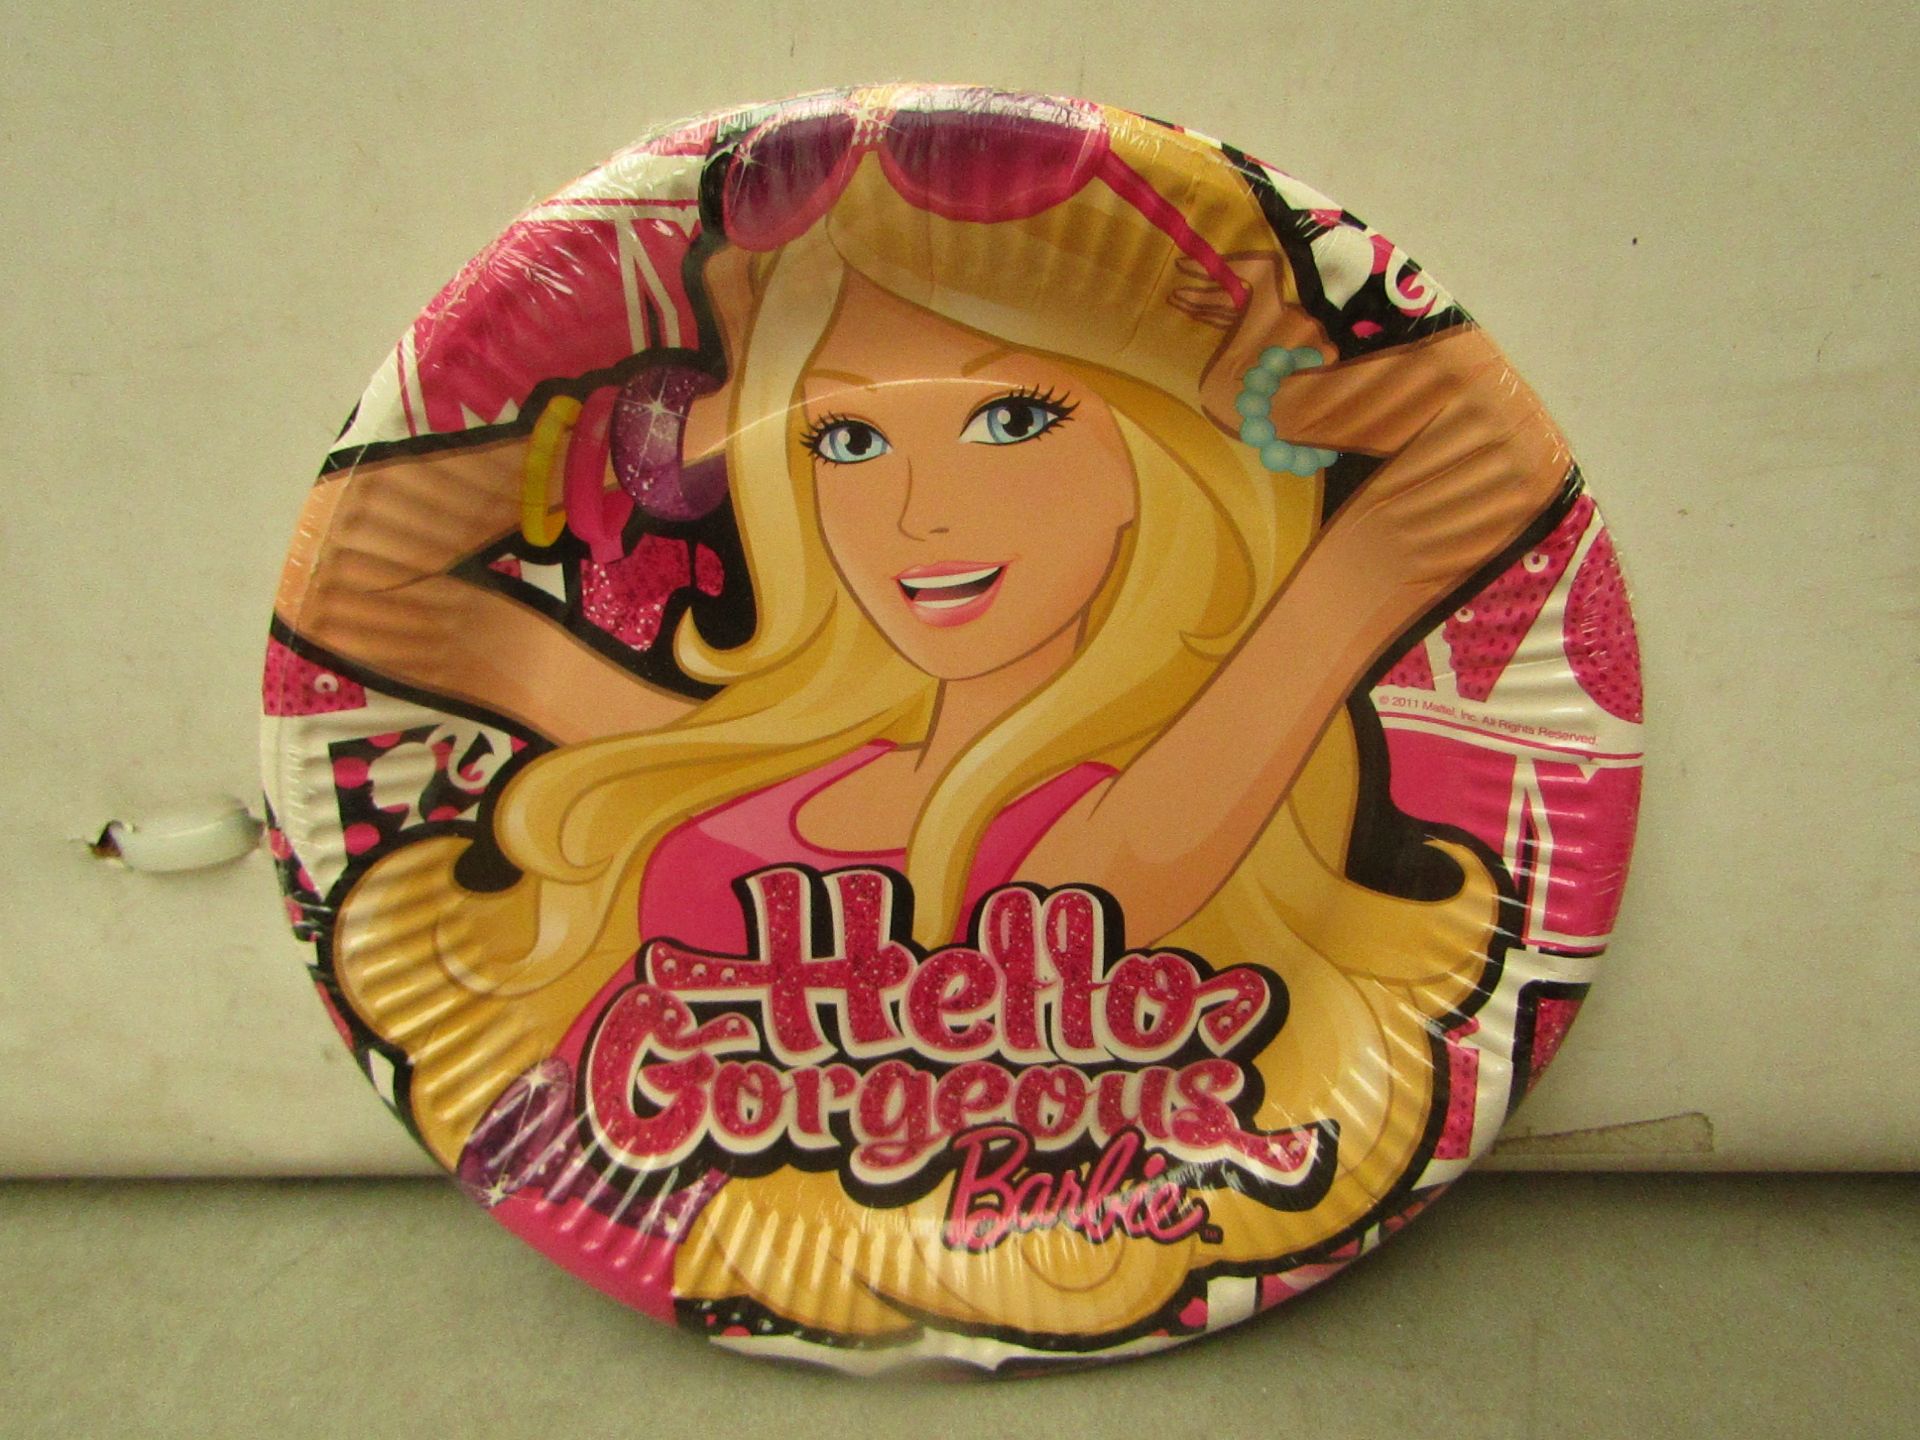 24 Packs of 3 Barbie Party Paper Plates. New & Packaged